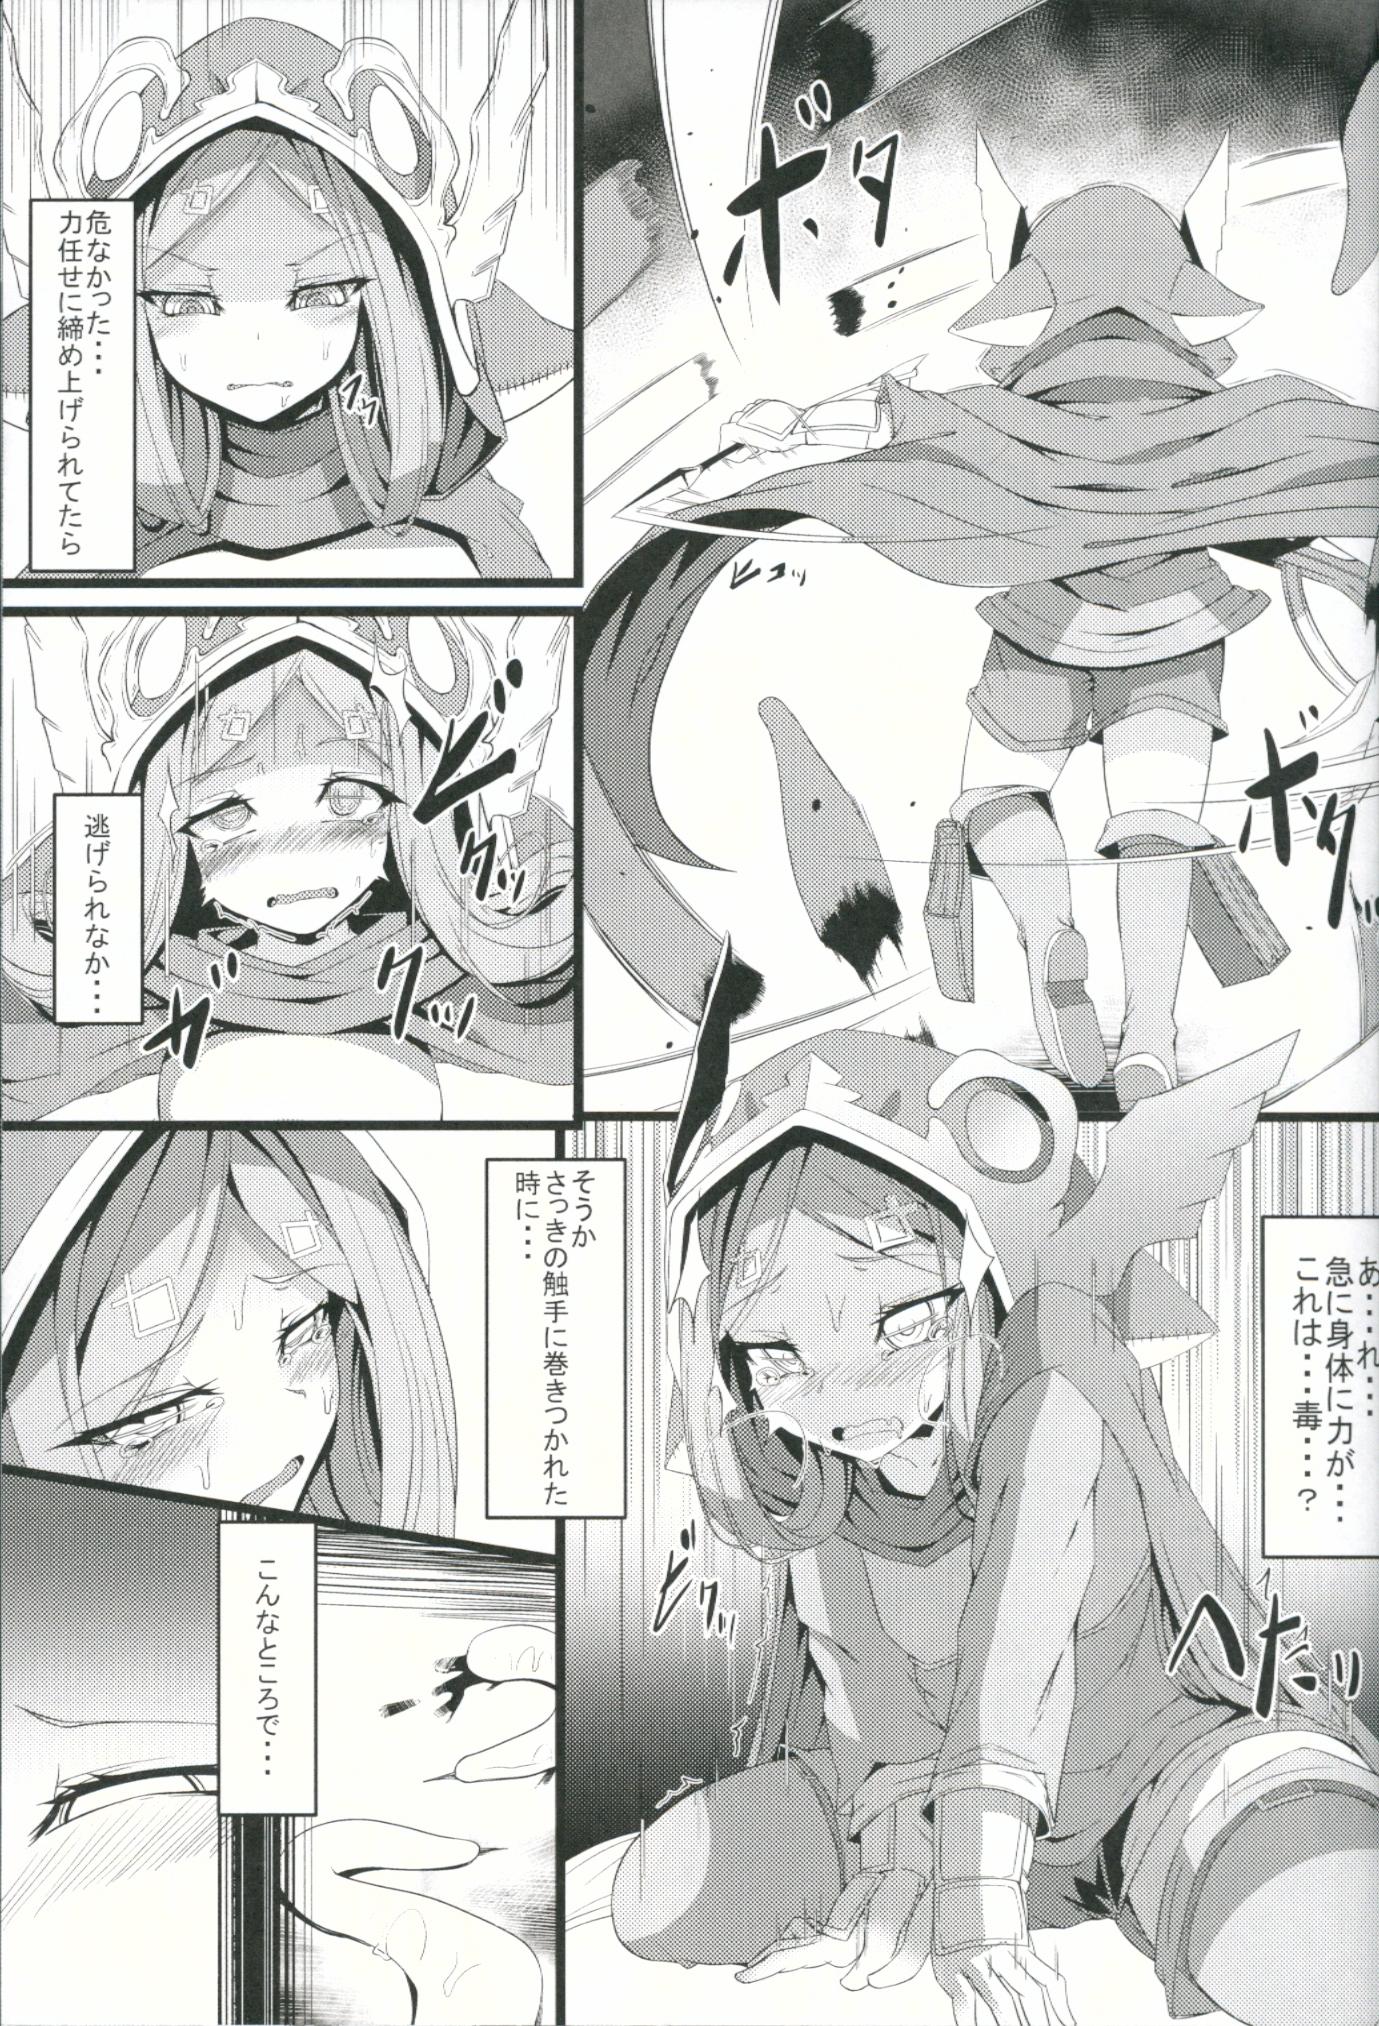 Suckingcock M.P. Vol. 6 - Granblue fantasy Picked Up - Page 6